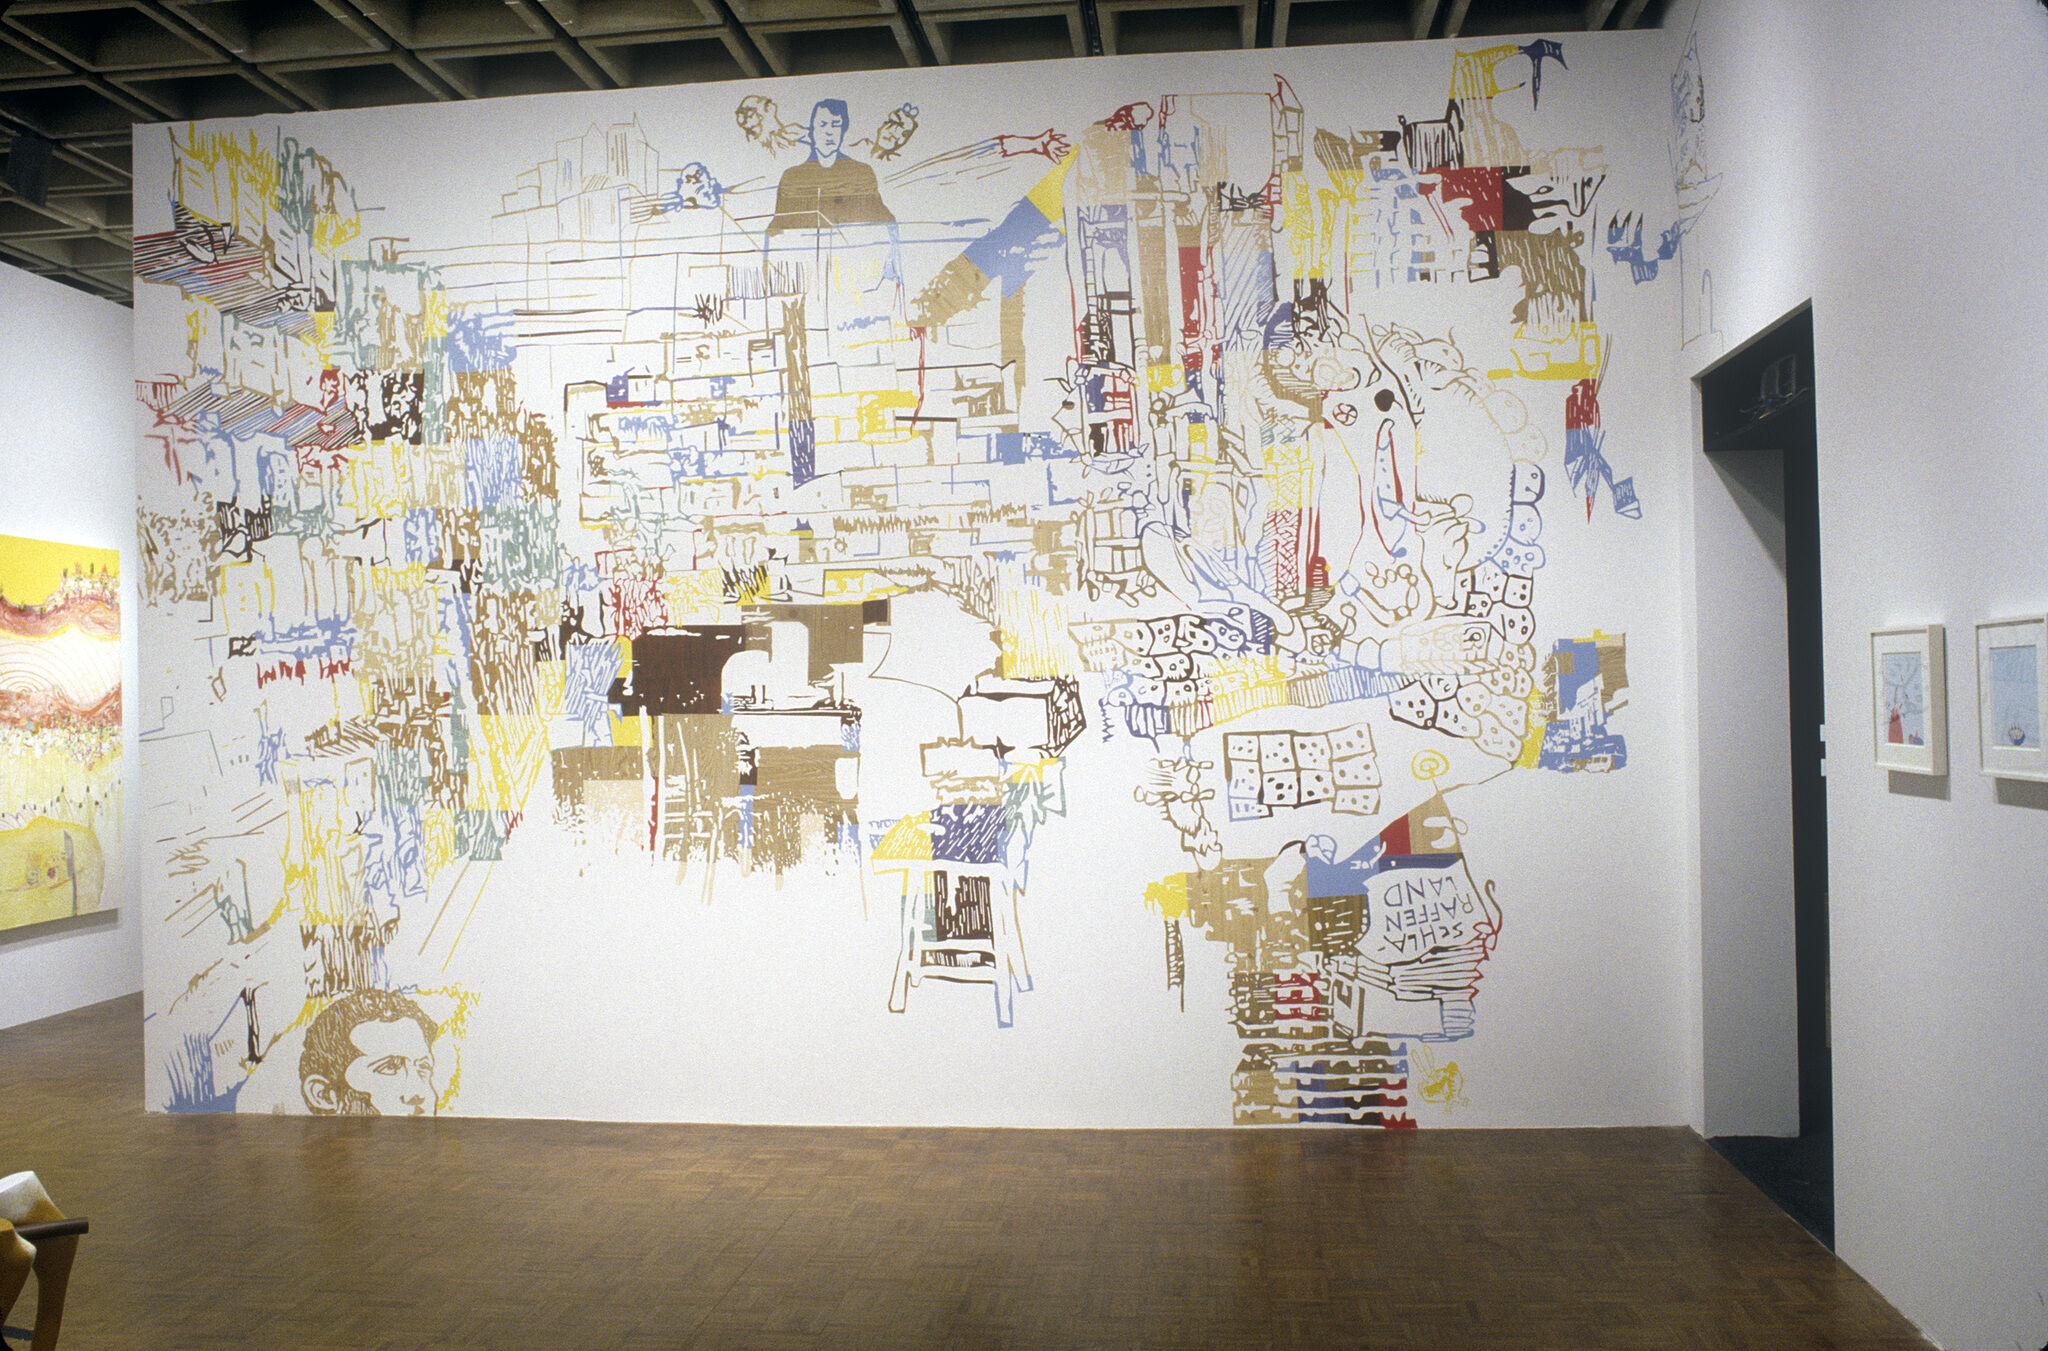 A wall in a gallery covered in a colorful wall drawing.